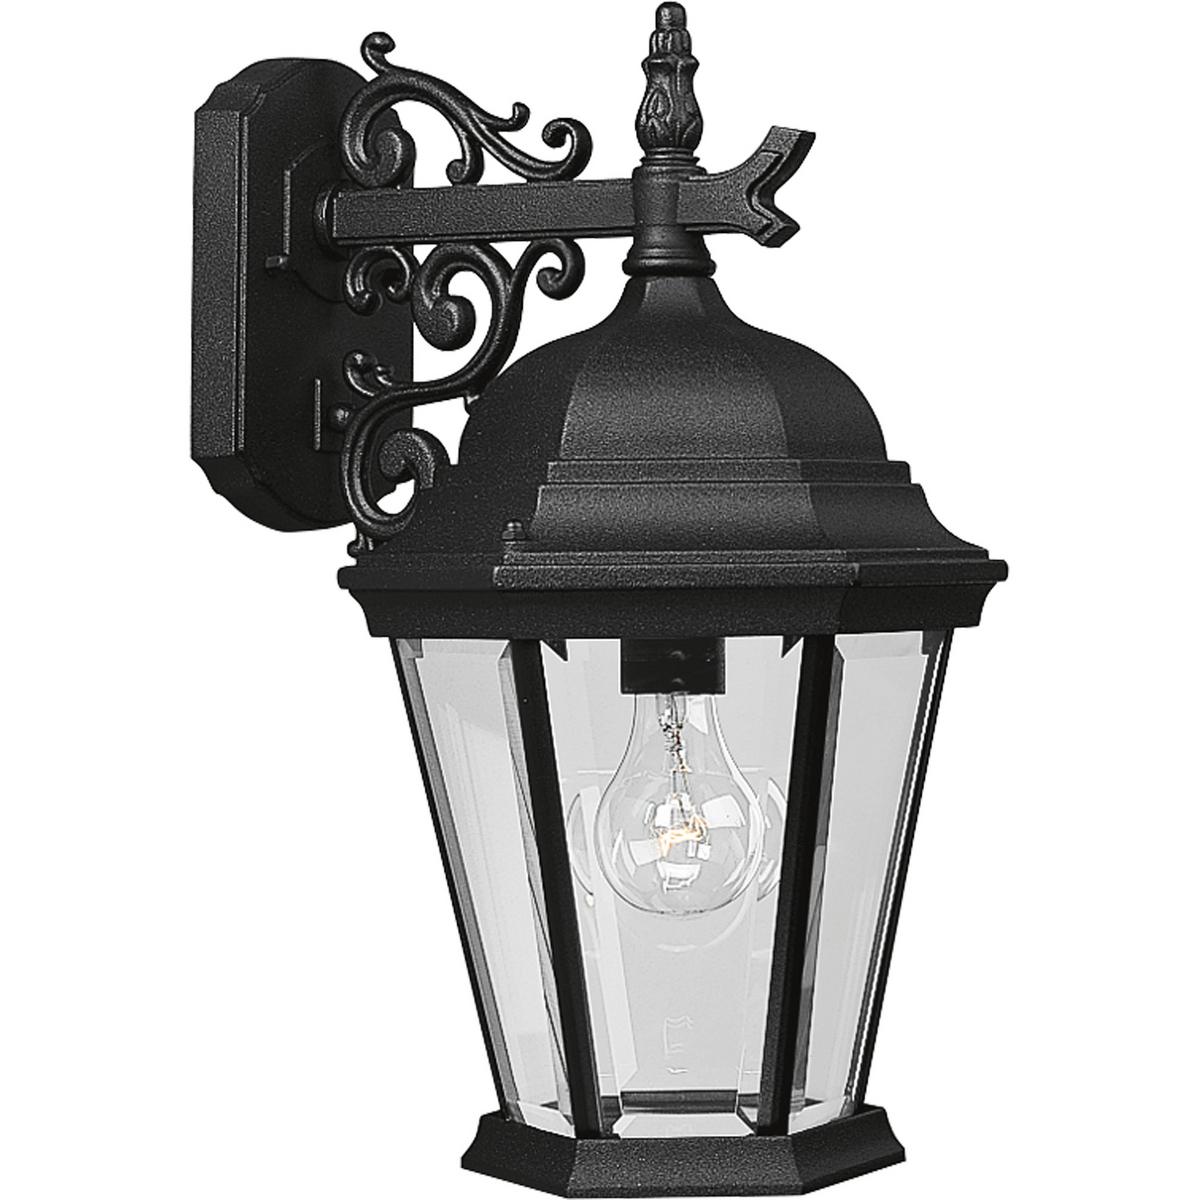 Hubbell P5683-31 The Welbourne collection features hexagonal framework with vine inspired scrolls and clear beveled glass panels. Cast aluminum construction with durable powder coat finish. One-light 9-3/4" outdoor wall lantern.  ; Hexagonal framework. ; Vine inspired scr